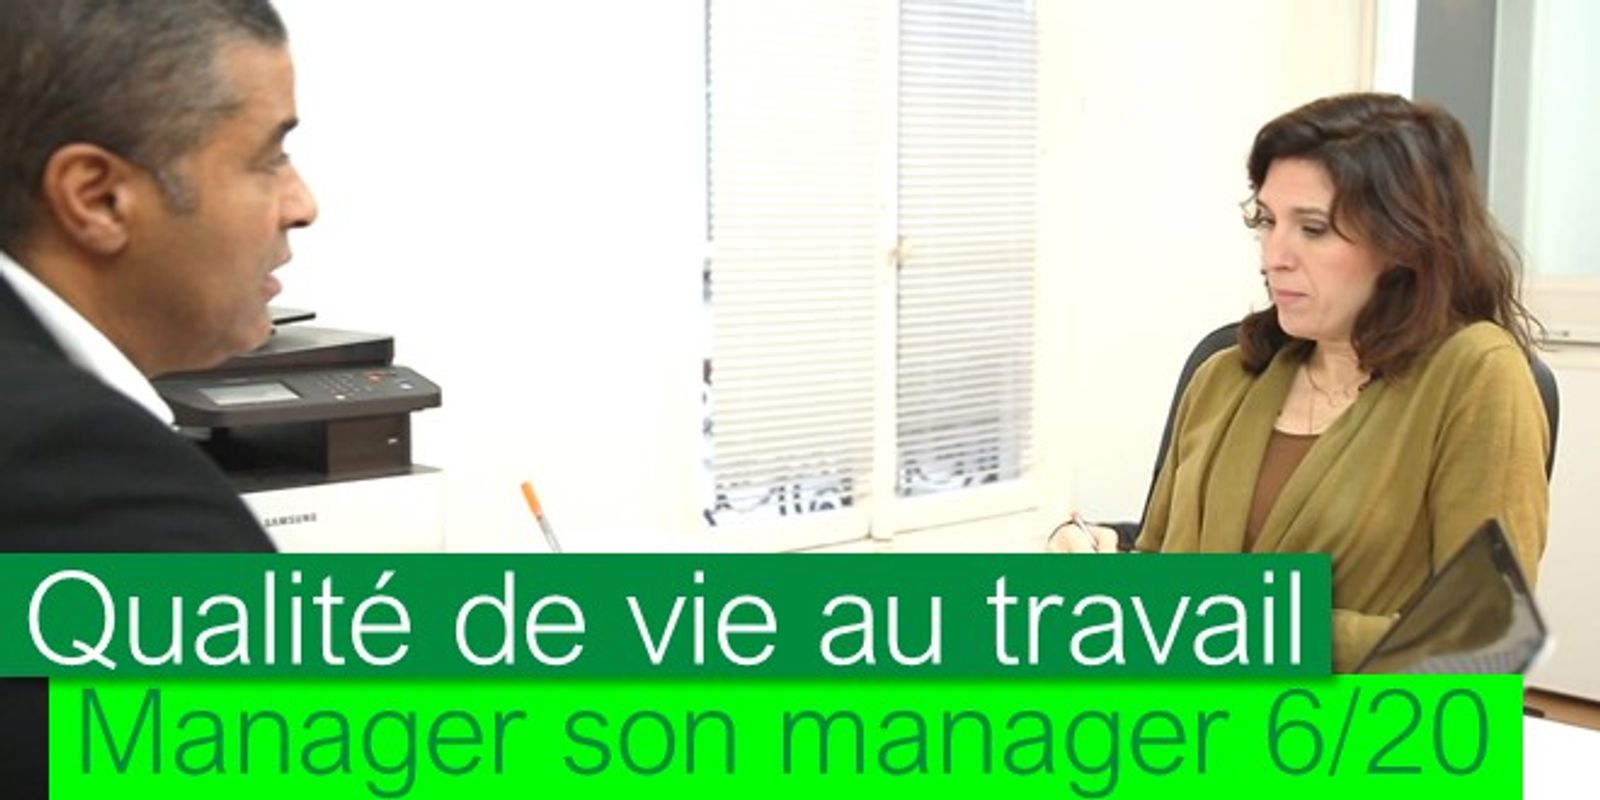 Manager son manager 6/20 : Mon manager me colle une étiquette